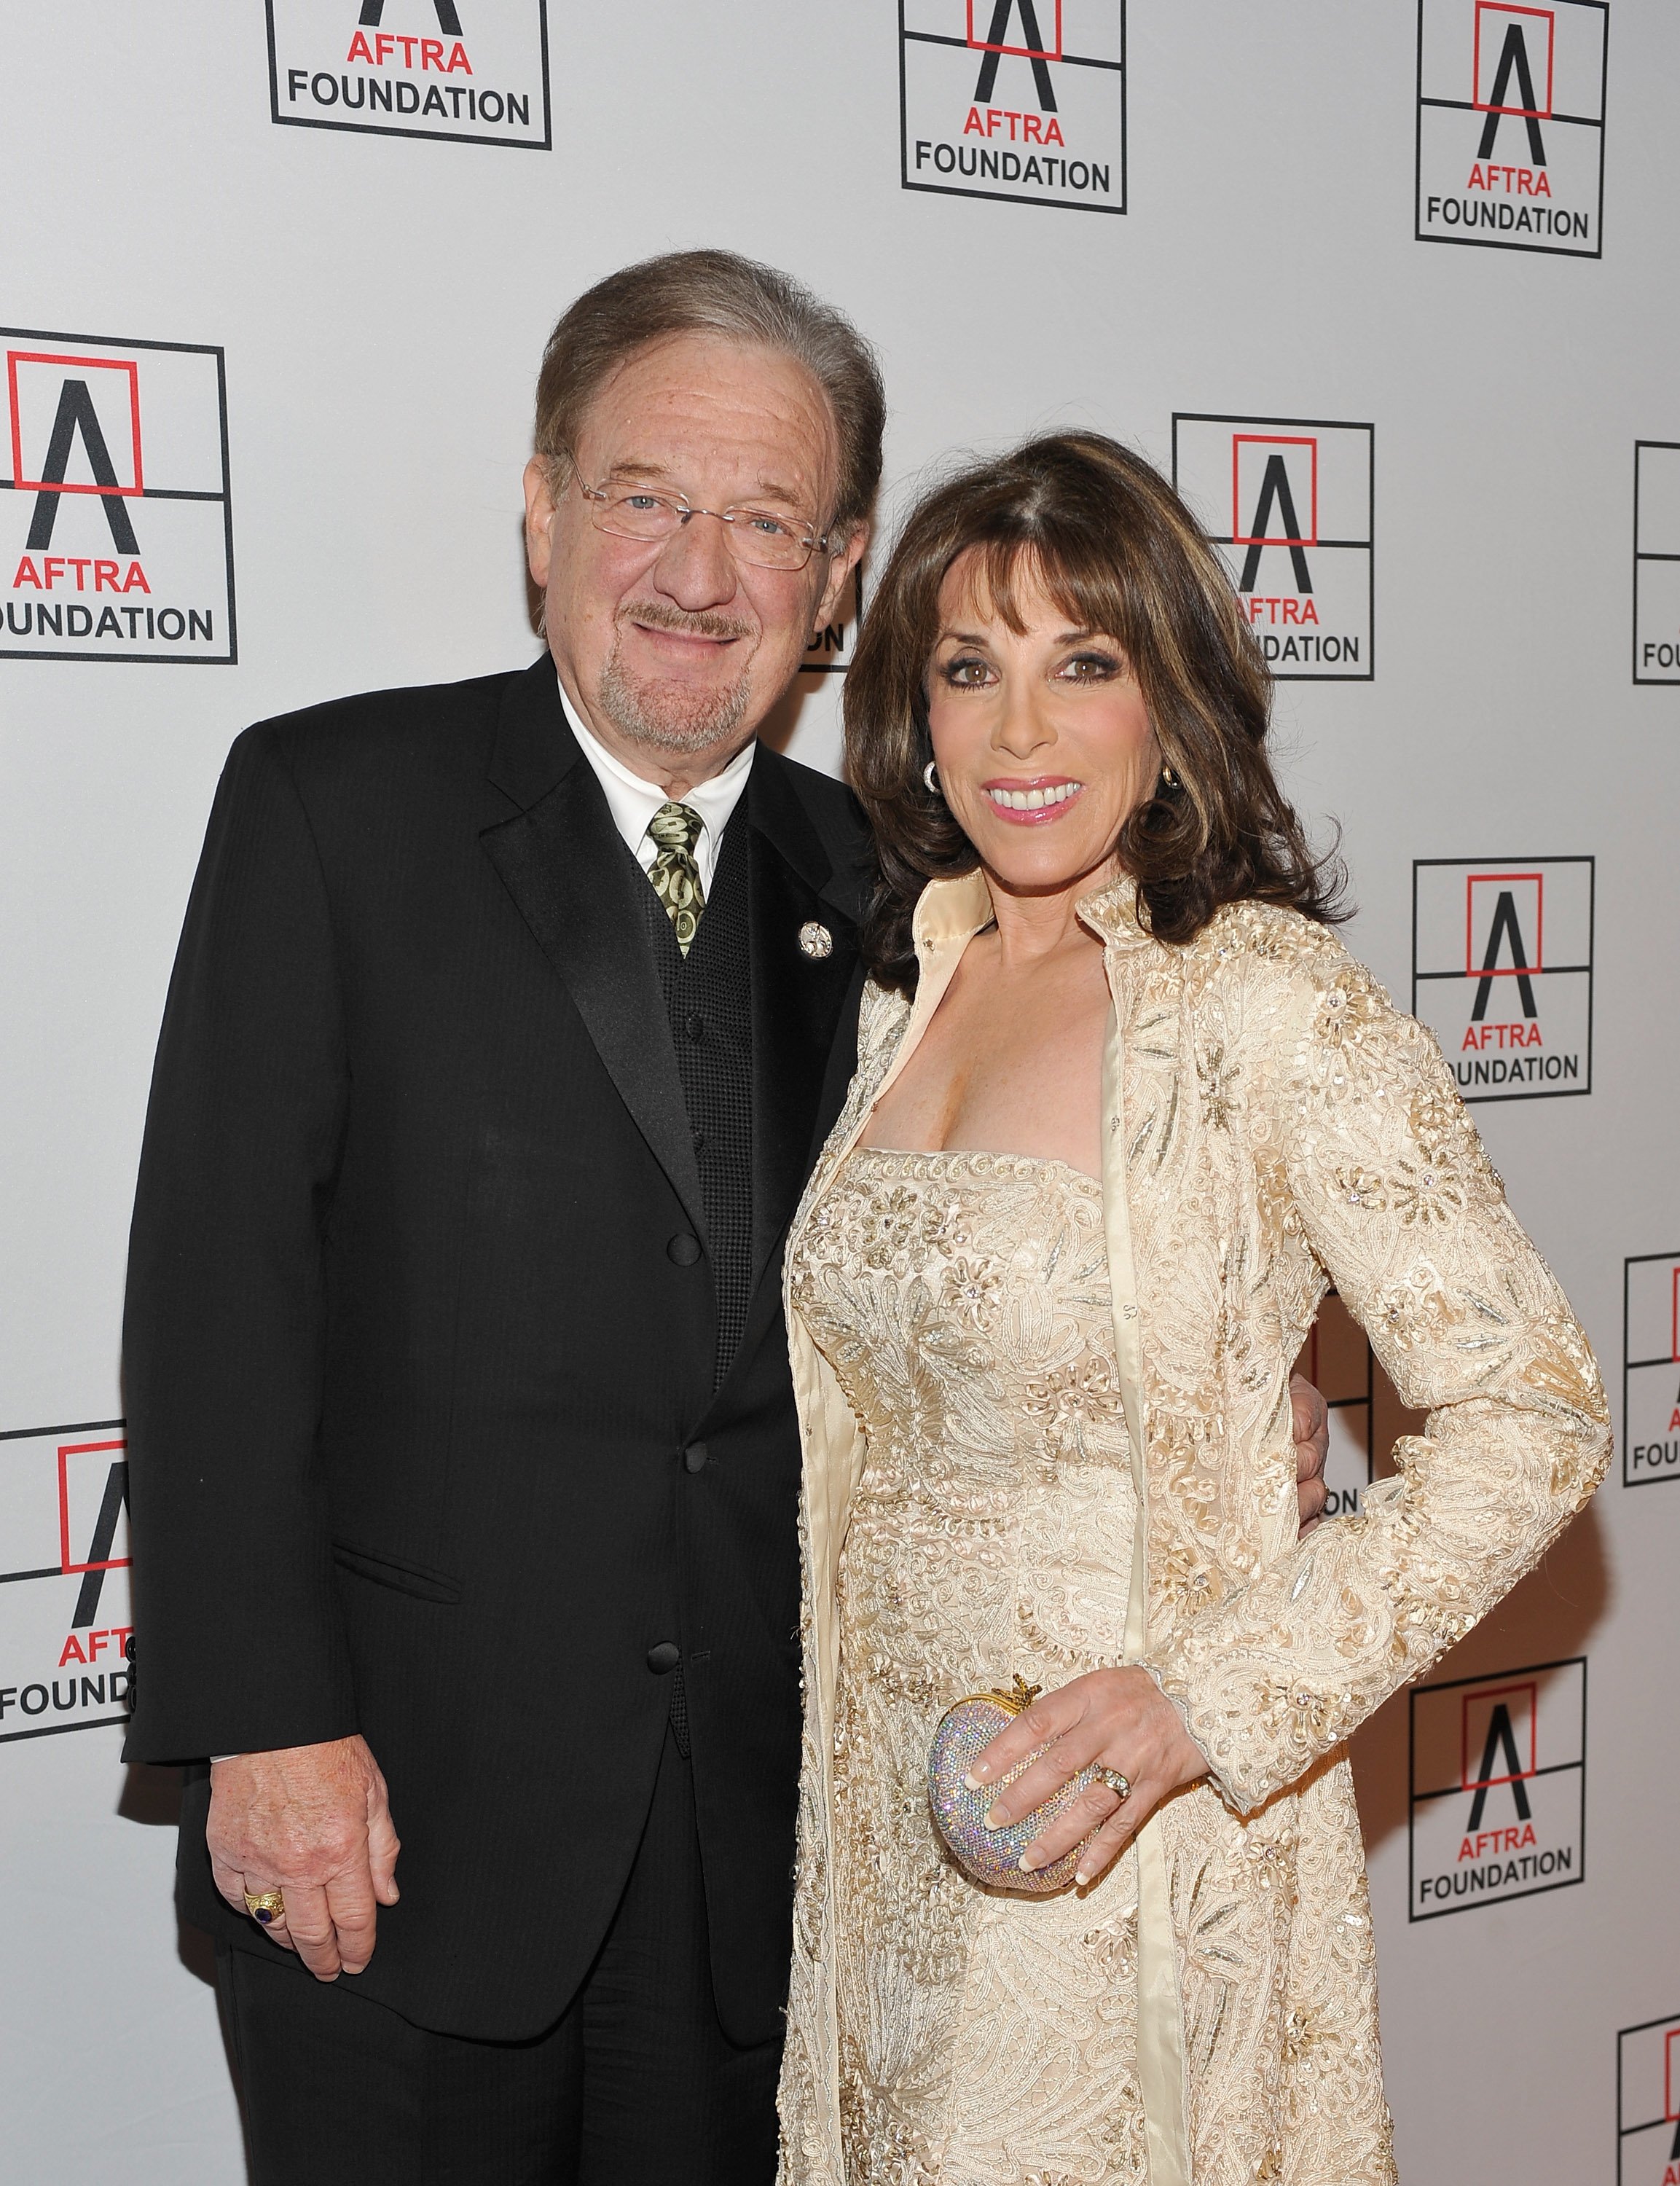 Ronald Linder and Kate Linder arriving at the 2011 AFTRA Media and Entertainment Excellence Awards at Club Nokia on March 21, 2011 in Los Angeles, California. / Source: Getty Images